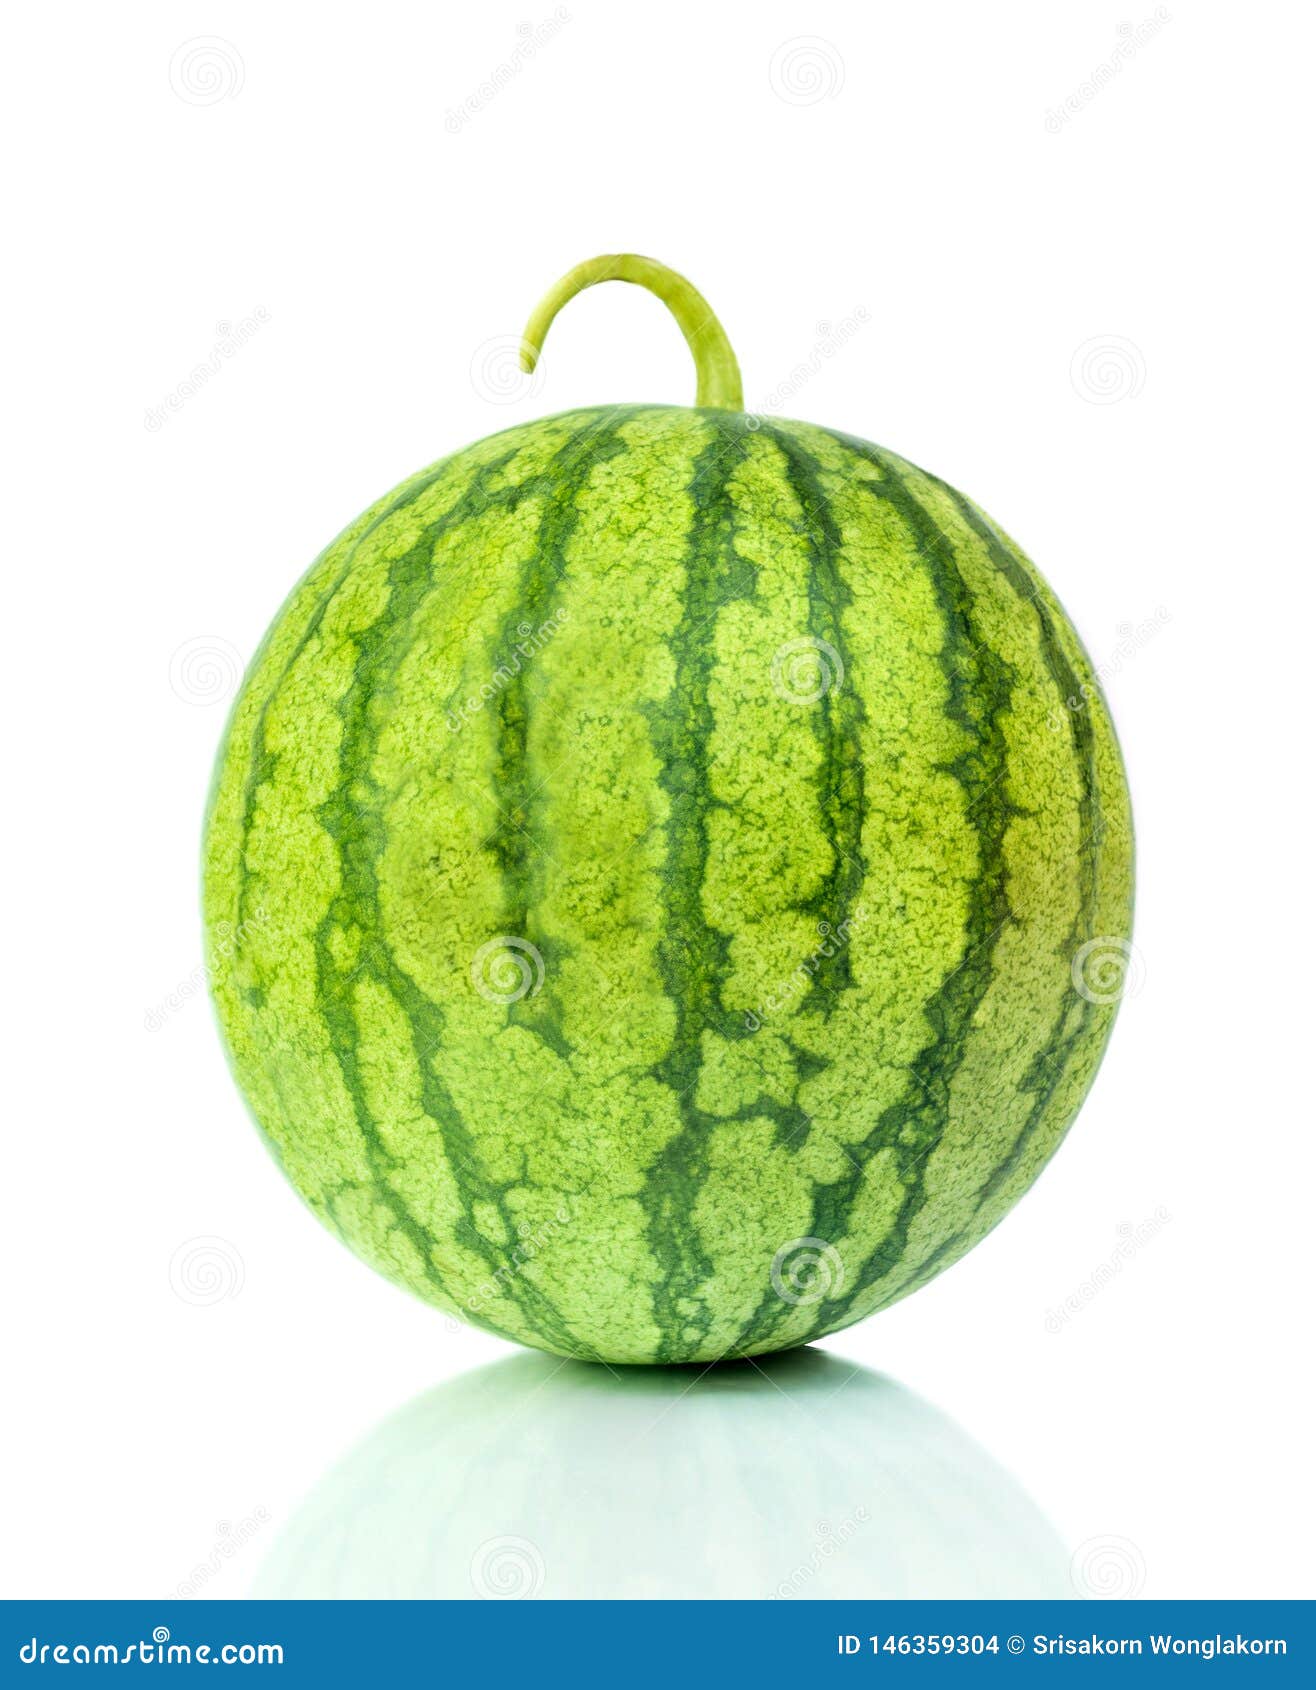 green water melon on white